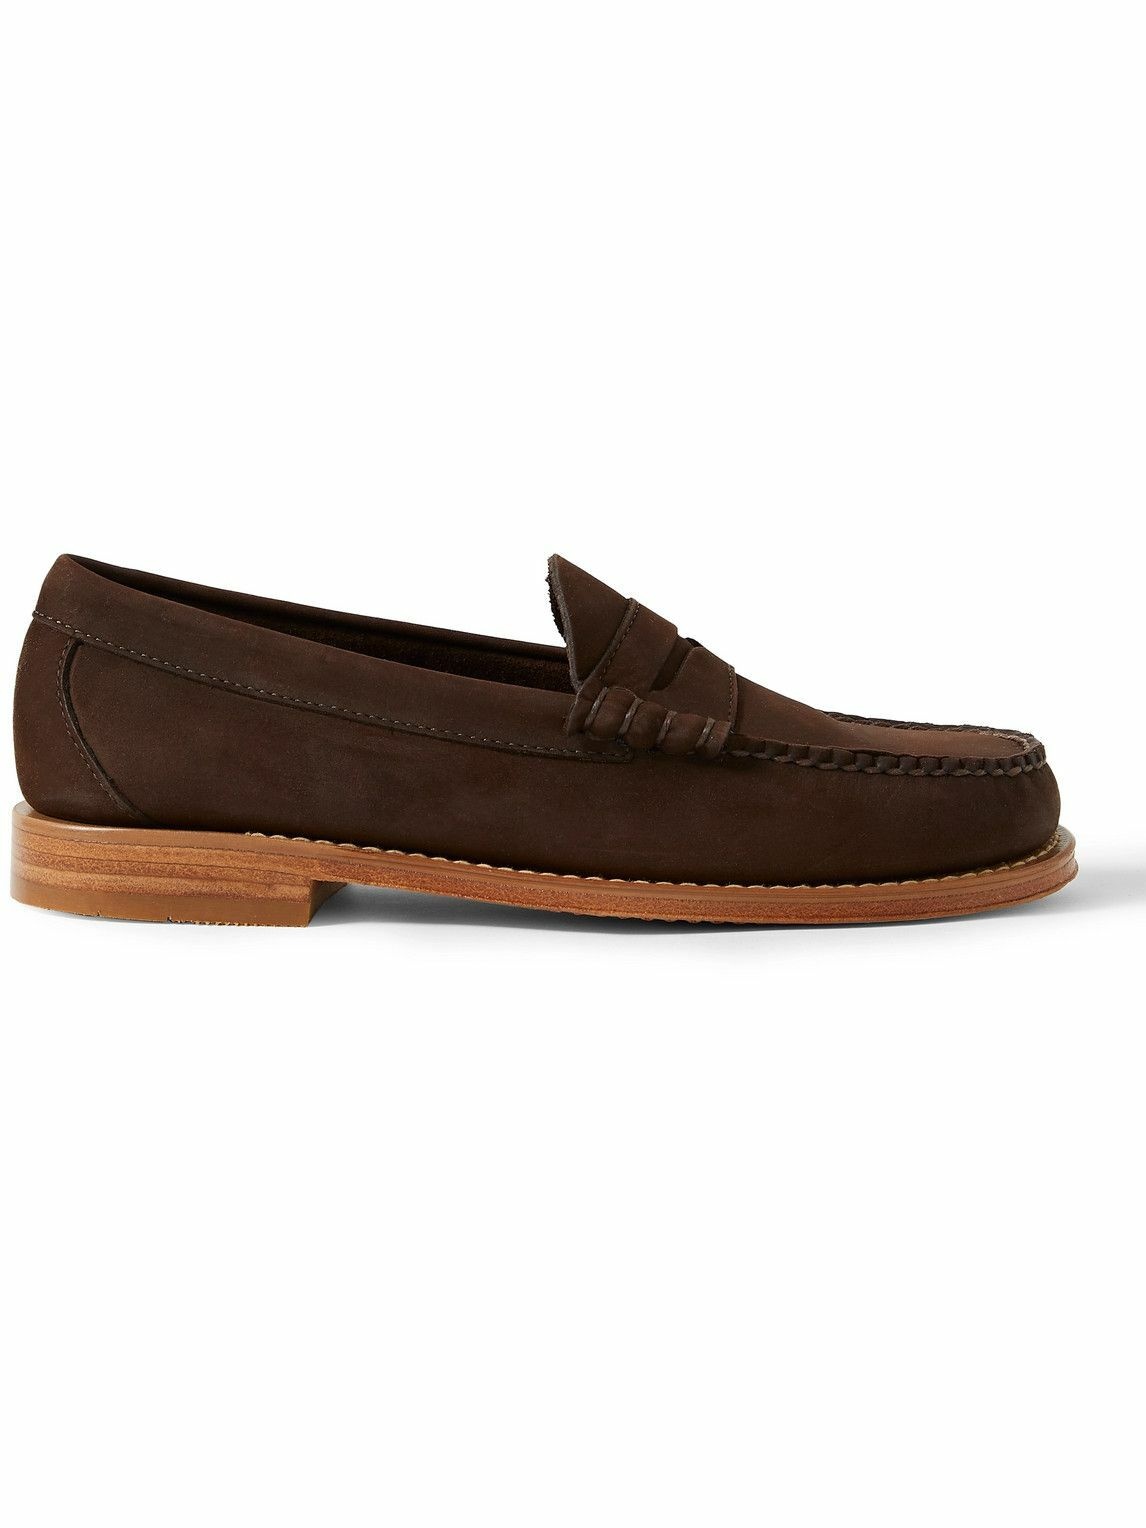 G.H. Bass & Co. - Weejun Nubuck Penny Loafers - Brown G.H. Bass & Co.